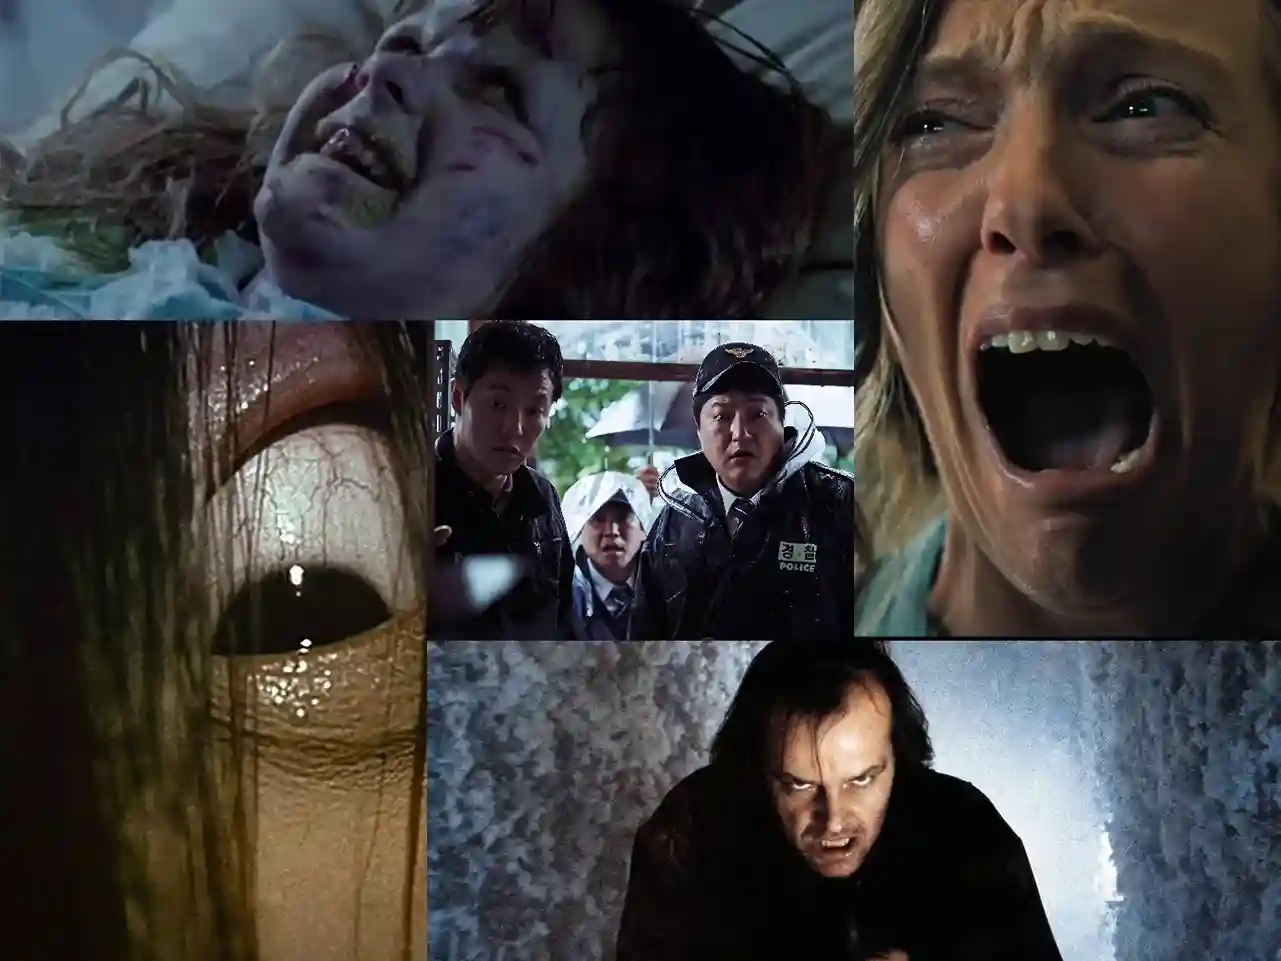 Top 5 Scariest Movies of All Time